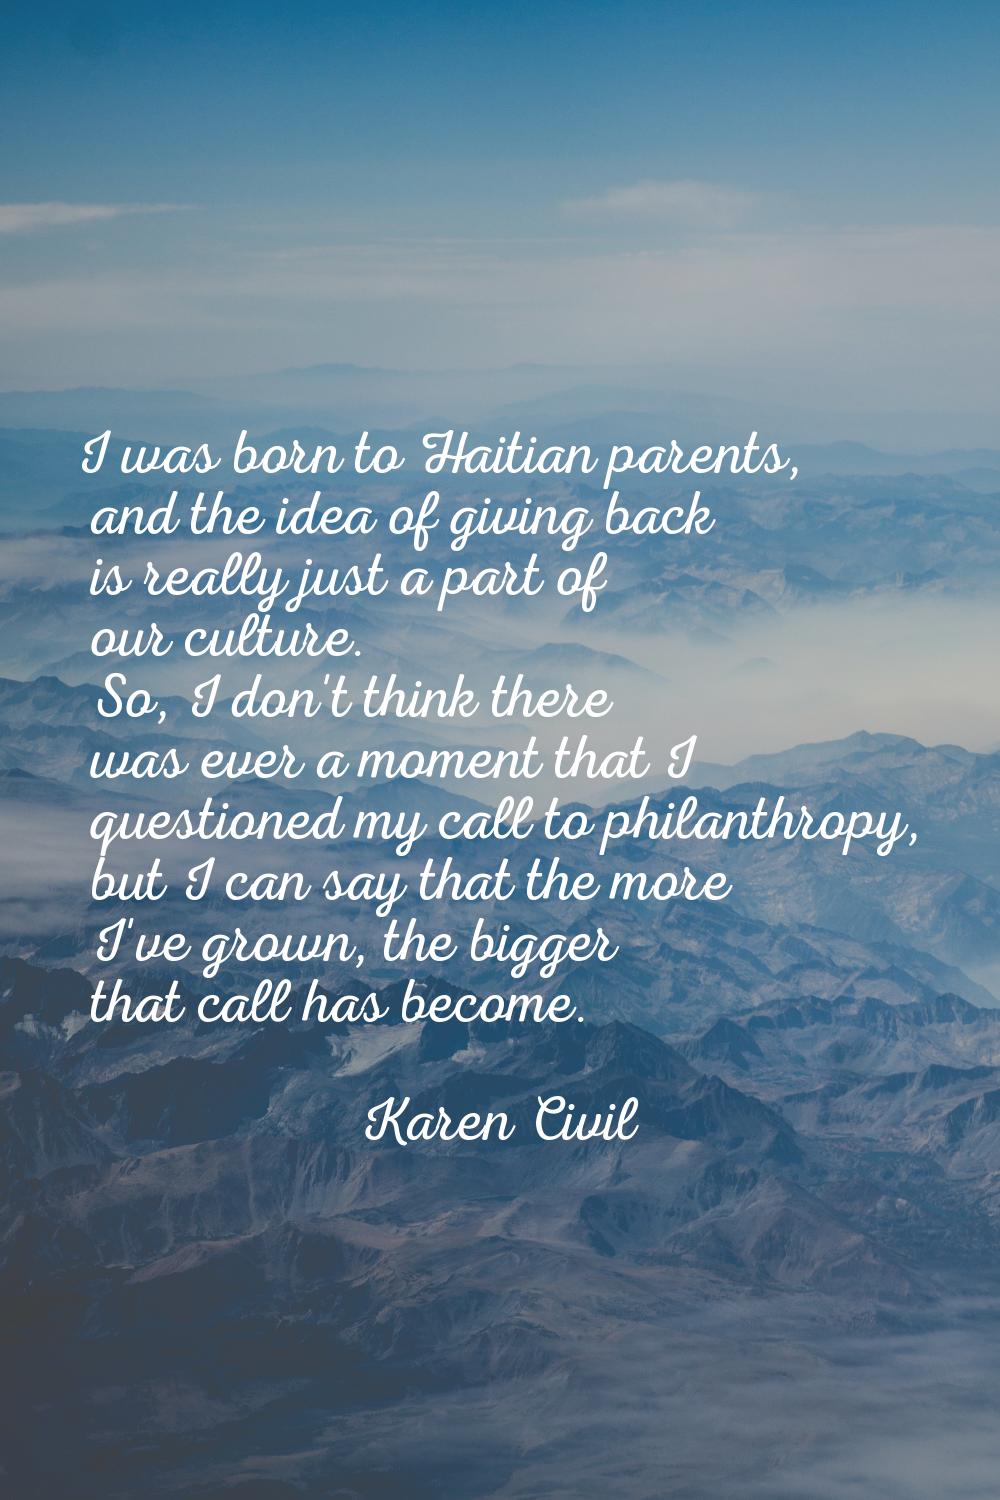 I was born to Haitian parents, and the idea of giving back is really just a part of our culture. So